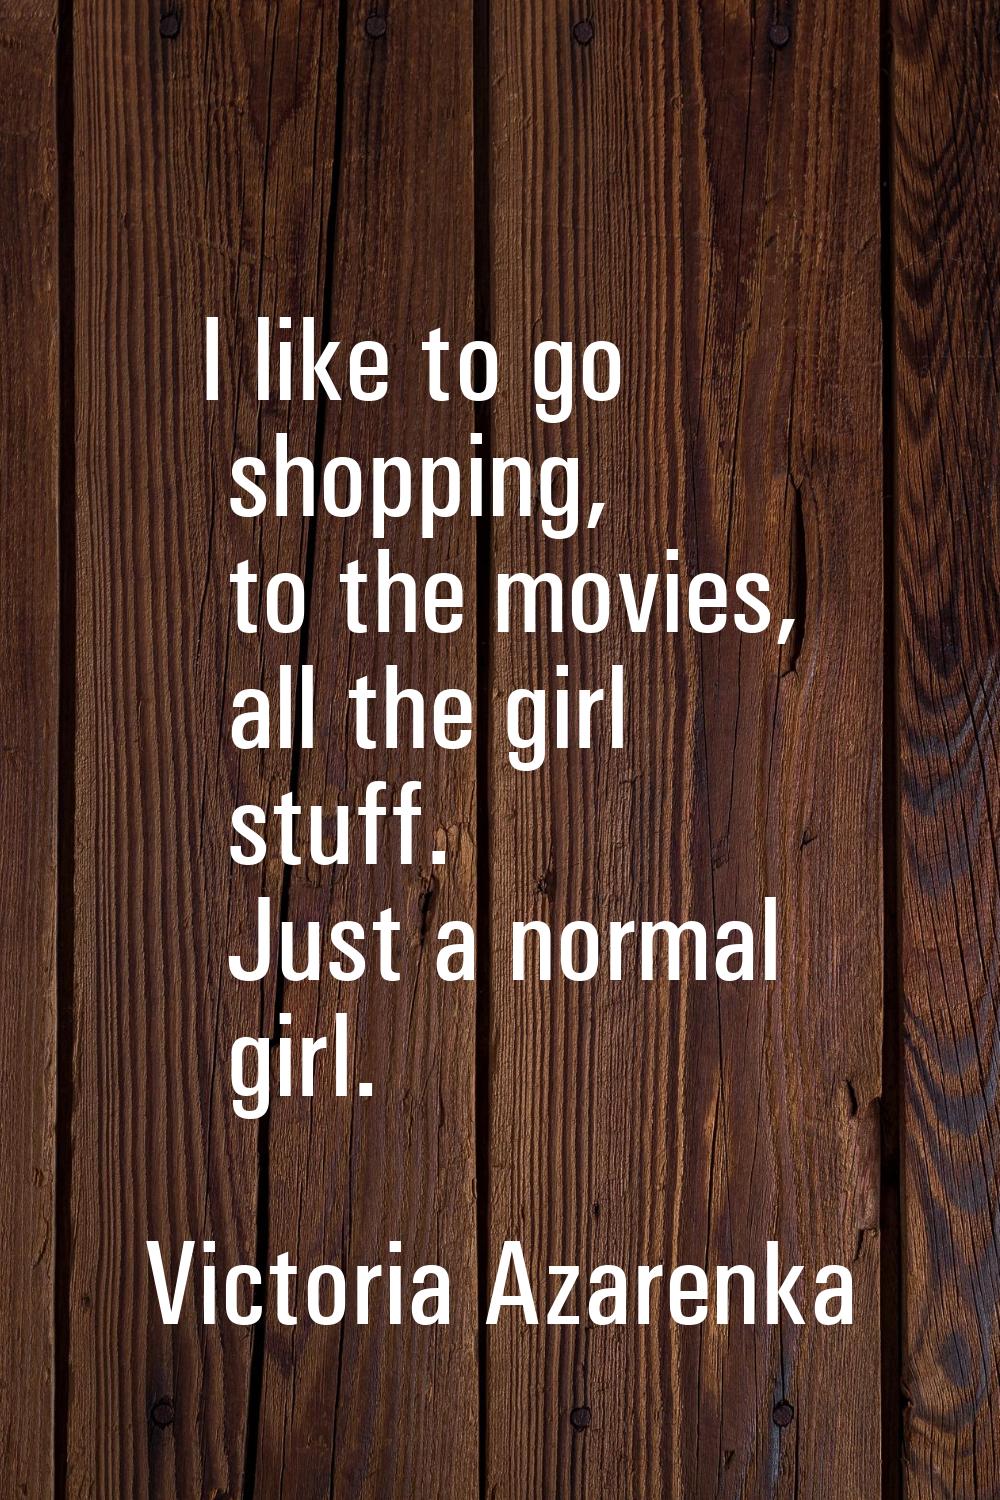 I like to go shopping, to the movies, all the girl stuff. Just a normal girl.